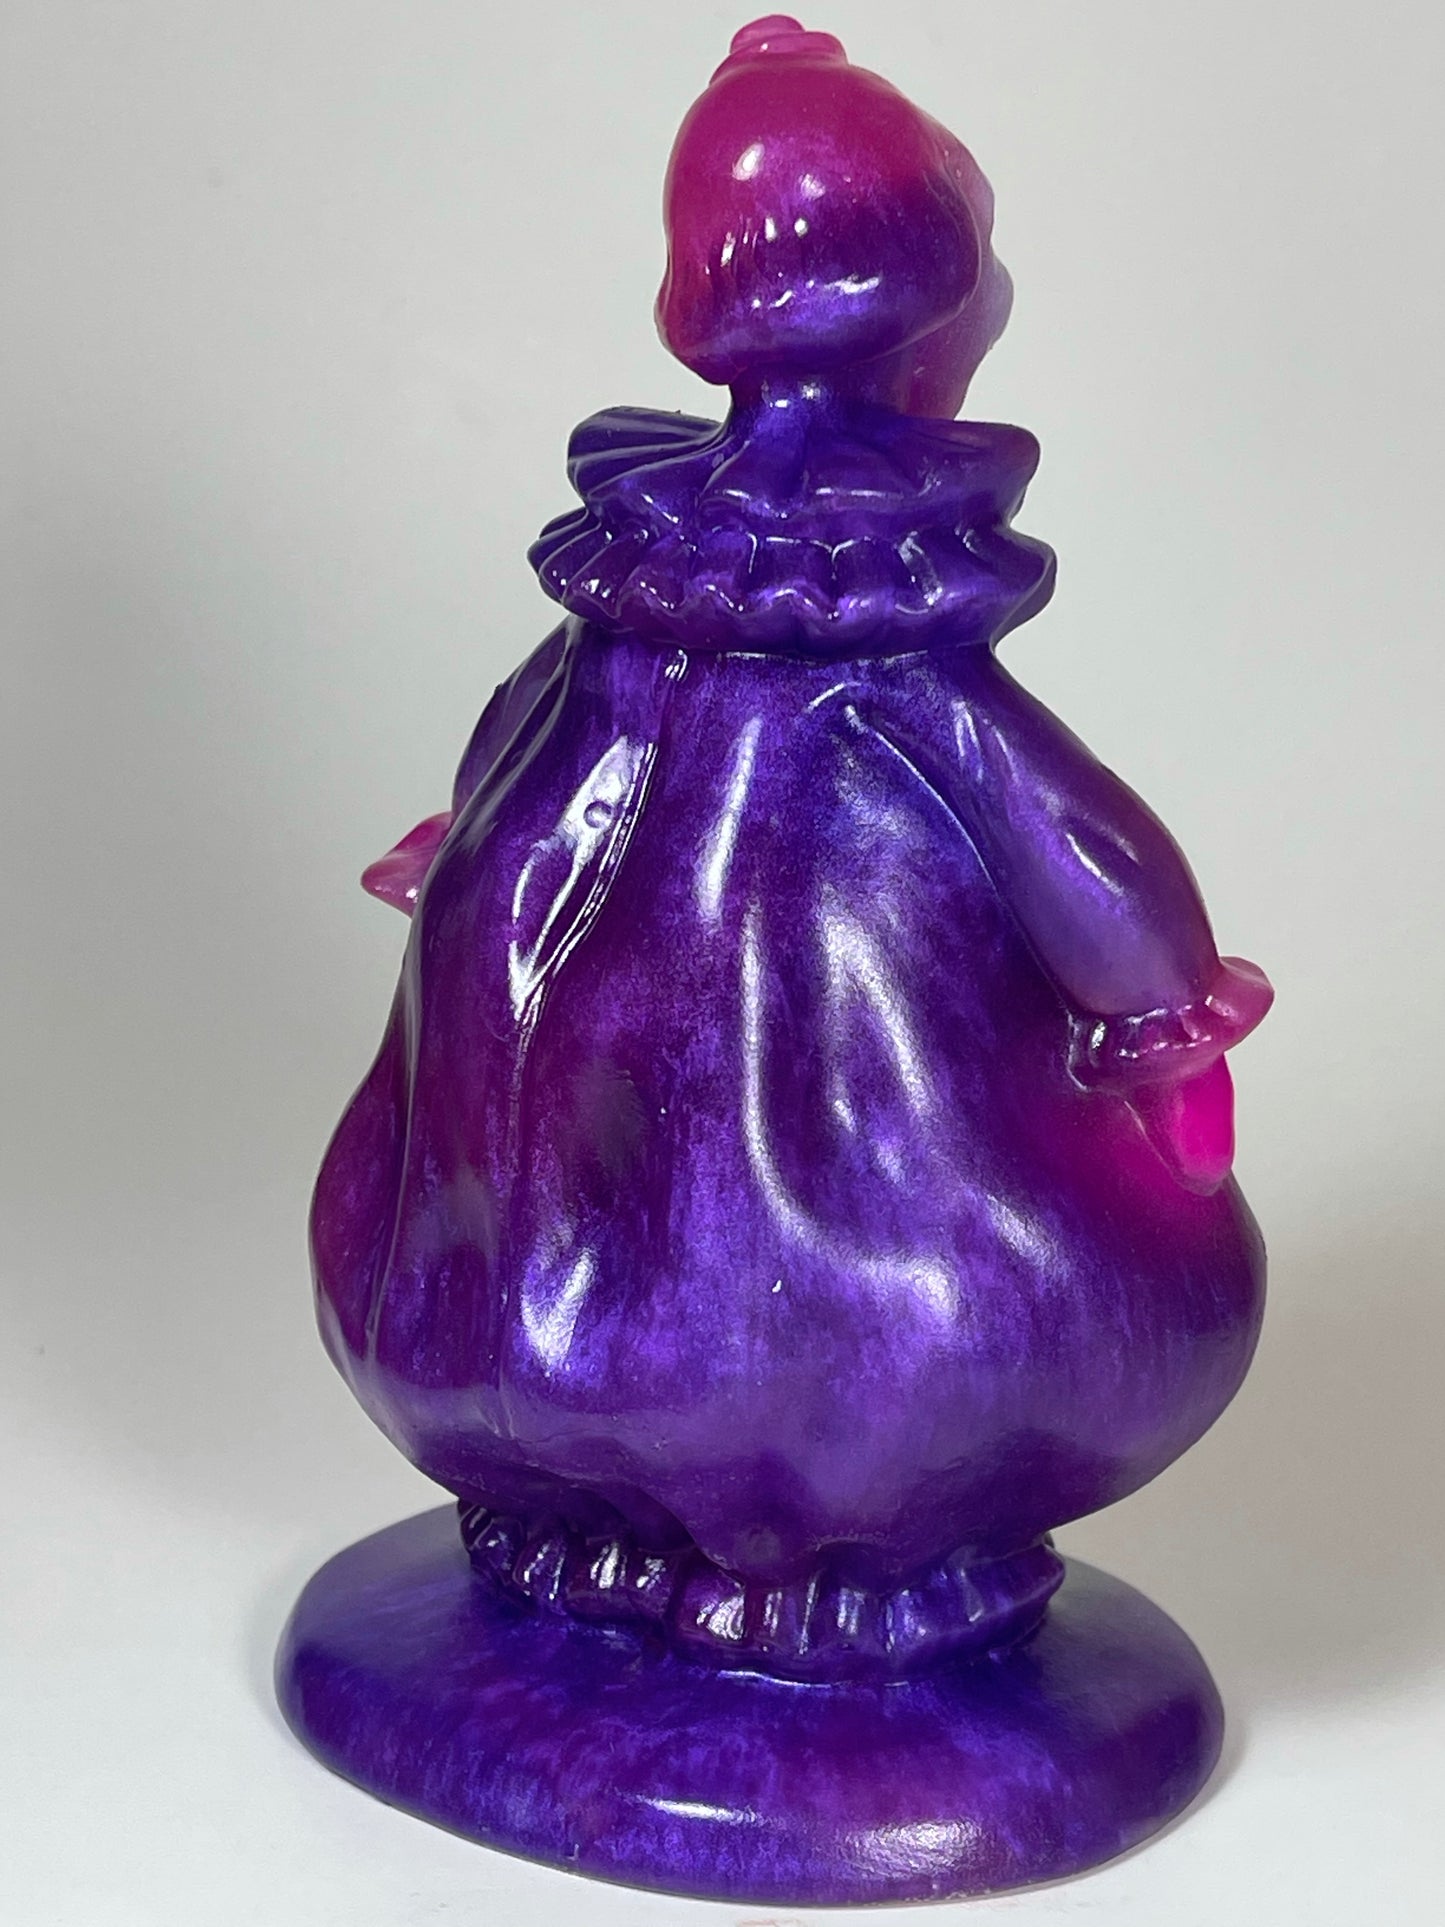 Ape Clown: Marbled Purple and Pink